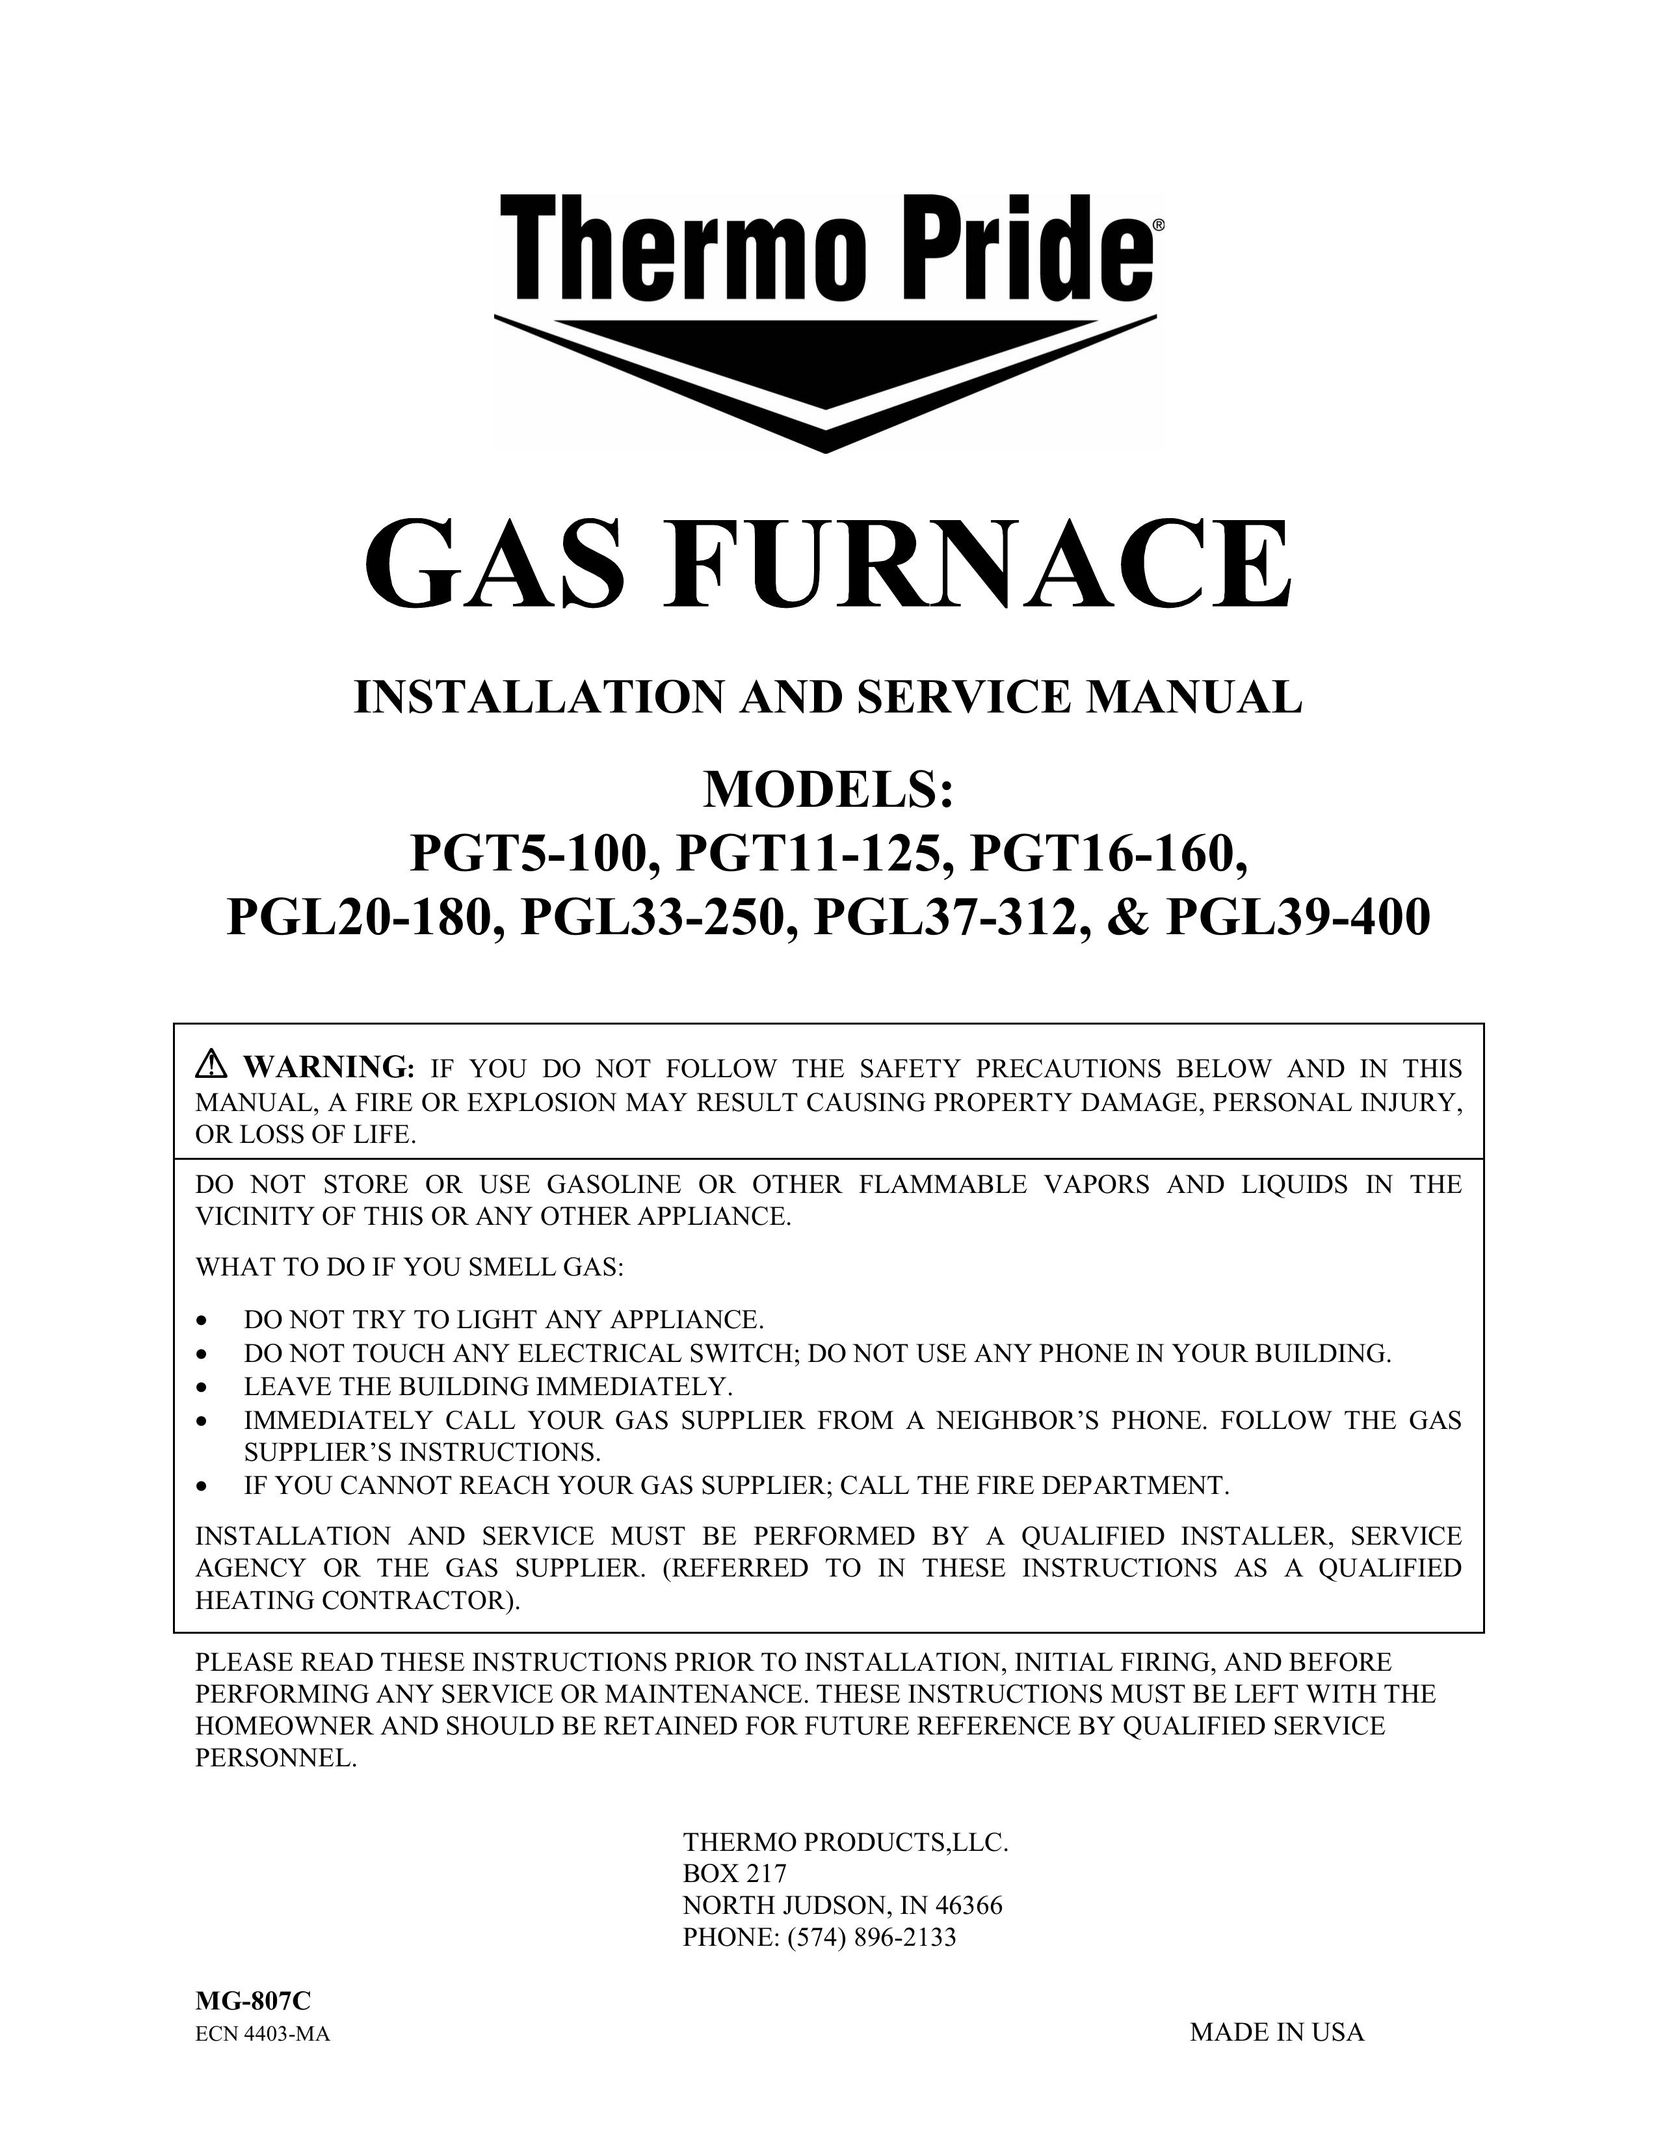 Thermo Products PGT5-100 Burner User Manual